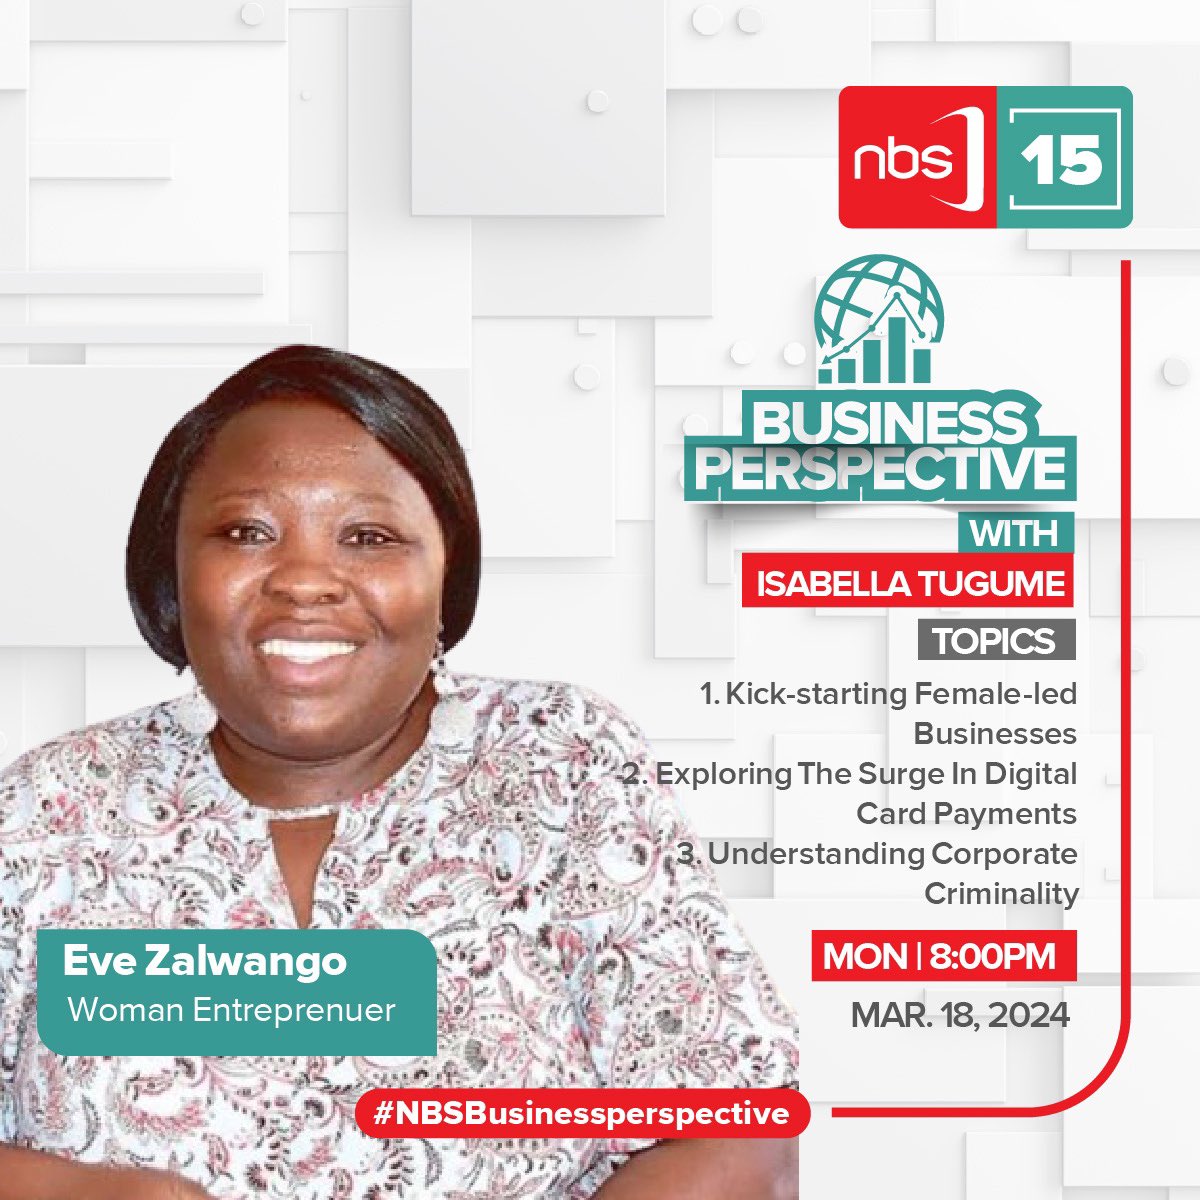 Don't miss out on tonight's episode of #NBSBusiness perspective at 8pm. We'll be discussing the empowerment of female-led businesses, the rise of digital card payments, and the complexities of corporate criminality. Hosted by @IsabellaTugume #NBSUpdates